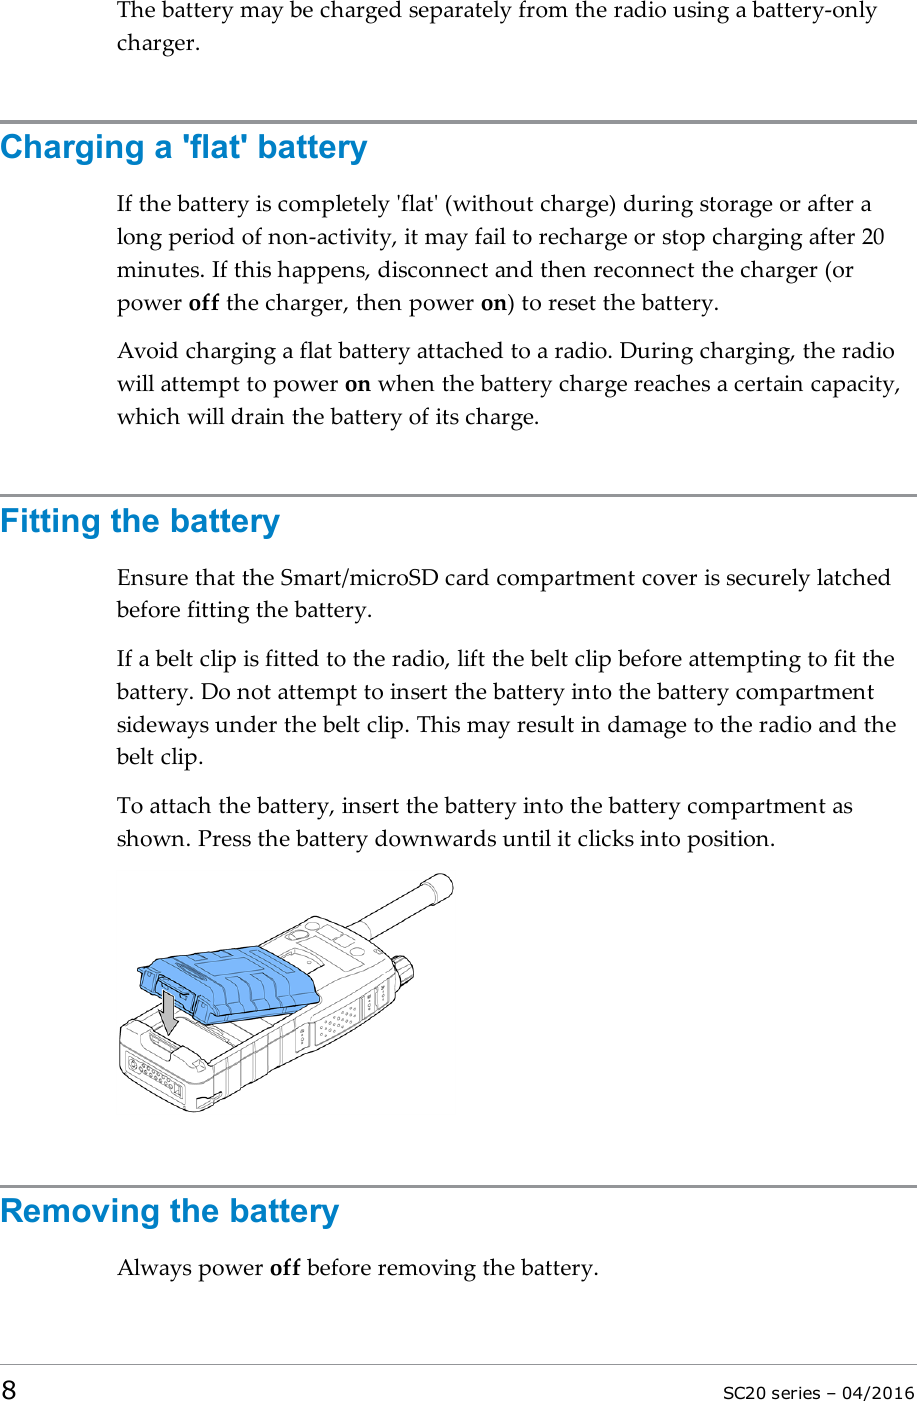 The battery may be charged separately from the radio using a battery-onlycharger.Charging a &apos;flat&apos; batteryIf the battery is completely &apos;flat&apos; (without charge) during storage or after along period of non-activity, it may fail to recharge or stop charging after 20minutes. If this happens, disconnect and then reconnect the charger (orpower off the charger, then power on) to reset the battery.Avoid charging a flat battery attached to a radio. During charging, the radiowill attempt to power on when the battery charge reaches a certain capacity,which will drain the battery of its charge.Fitting the batteryEnsure that the Smart/microSD card compartment cover is securely latchedbefore fitting the battery.If a belt clip is fitted to the radio, lift the belt clip before attempting to fit thebattery. Do not attempt to insert the battery into the battery compartmentsideways under the belt clip. This may result in damage to the radio and thebelt clip.To attach the battery, insert the battery into the battery compartment asshown. Press the battery downwards until it clicks into position.Removing the batteryAlways power off before removing the battery.8SC20 series – 04/2016